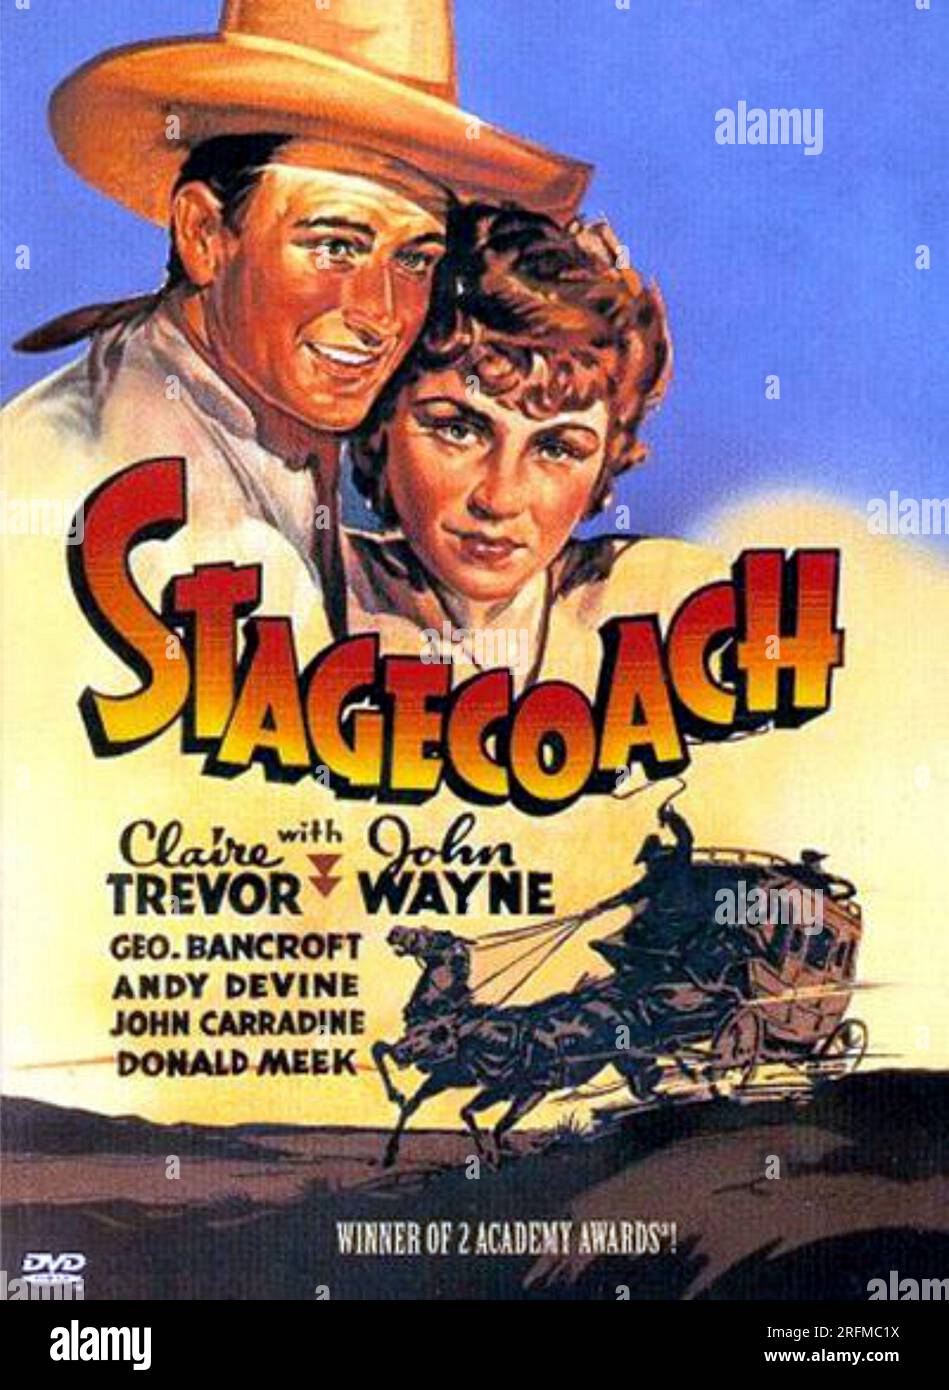 Stagecoach', a 1939 film starring Claire Trevor and John Wayne. Stock Photo